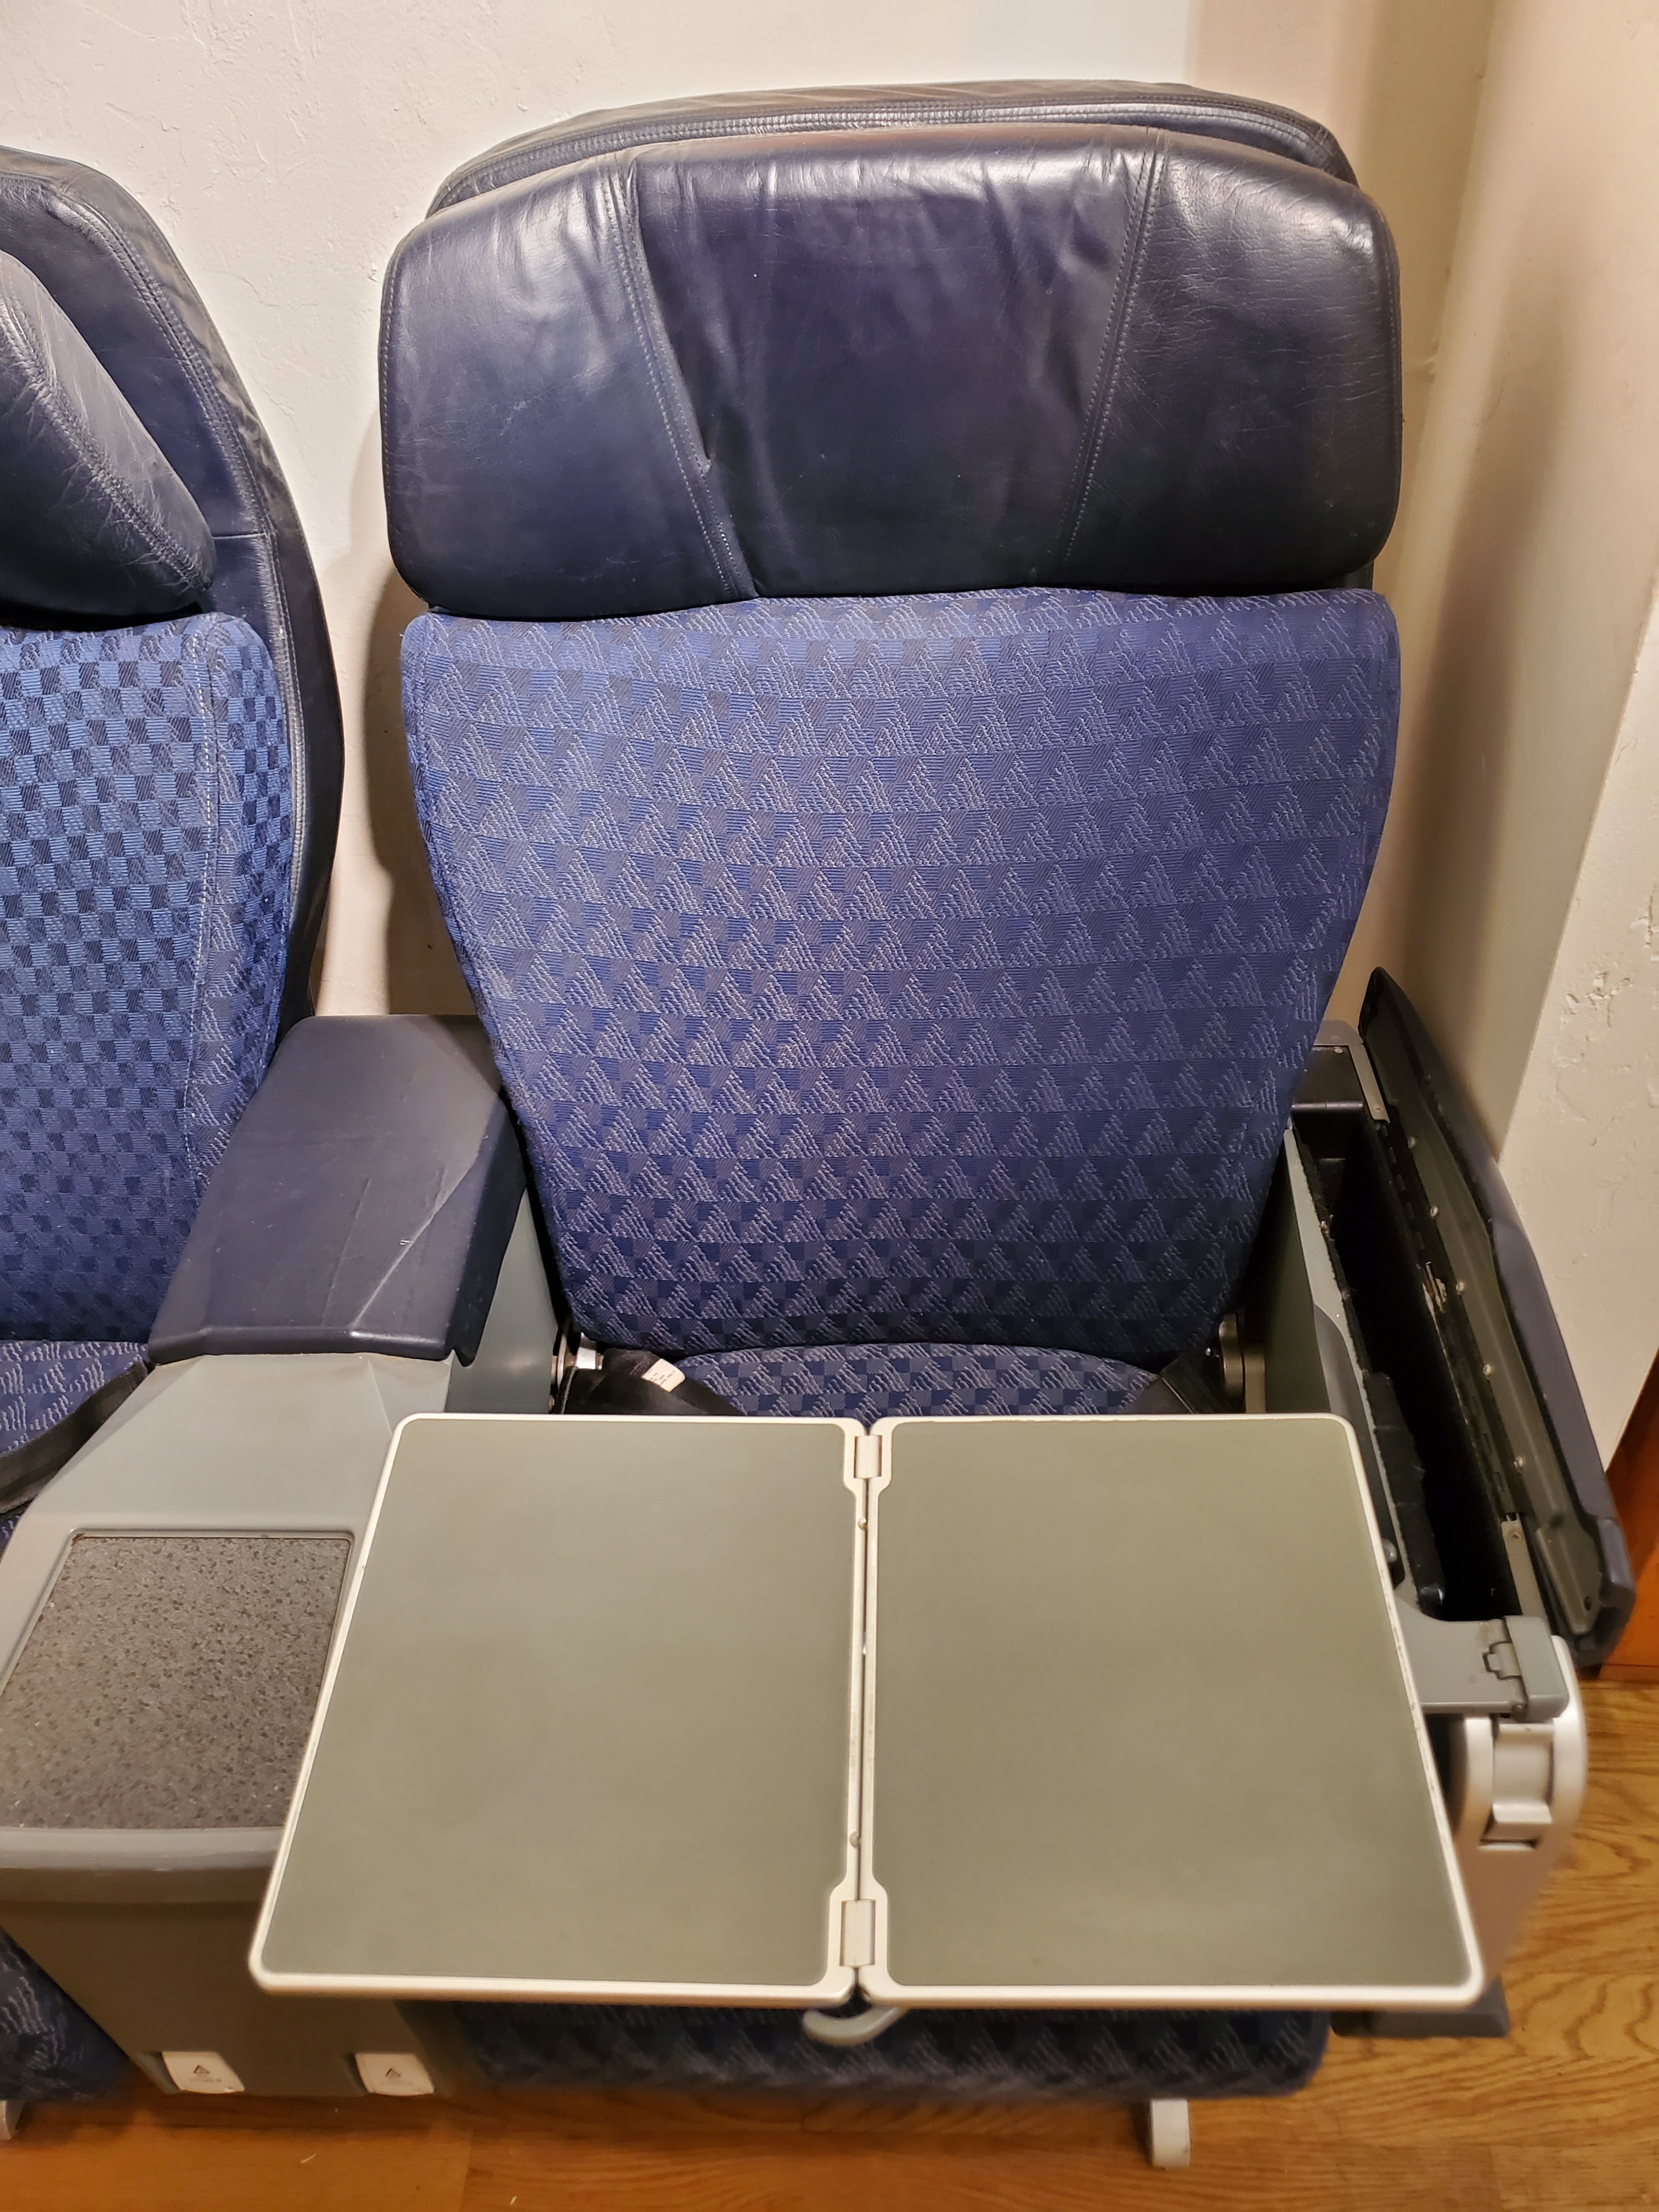 first class airplane seats